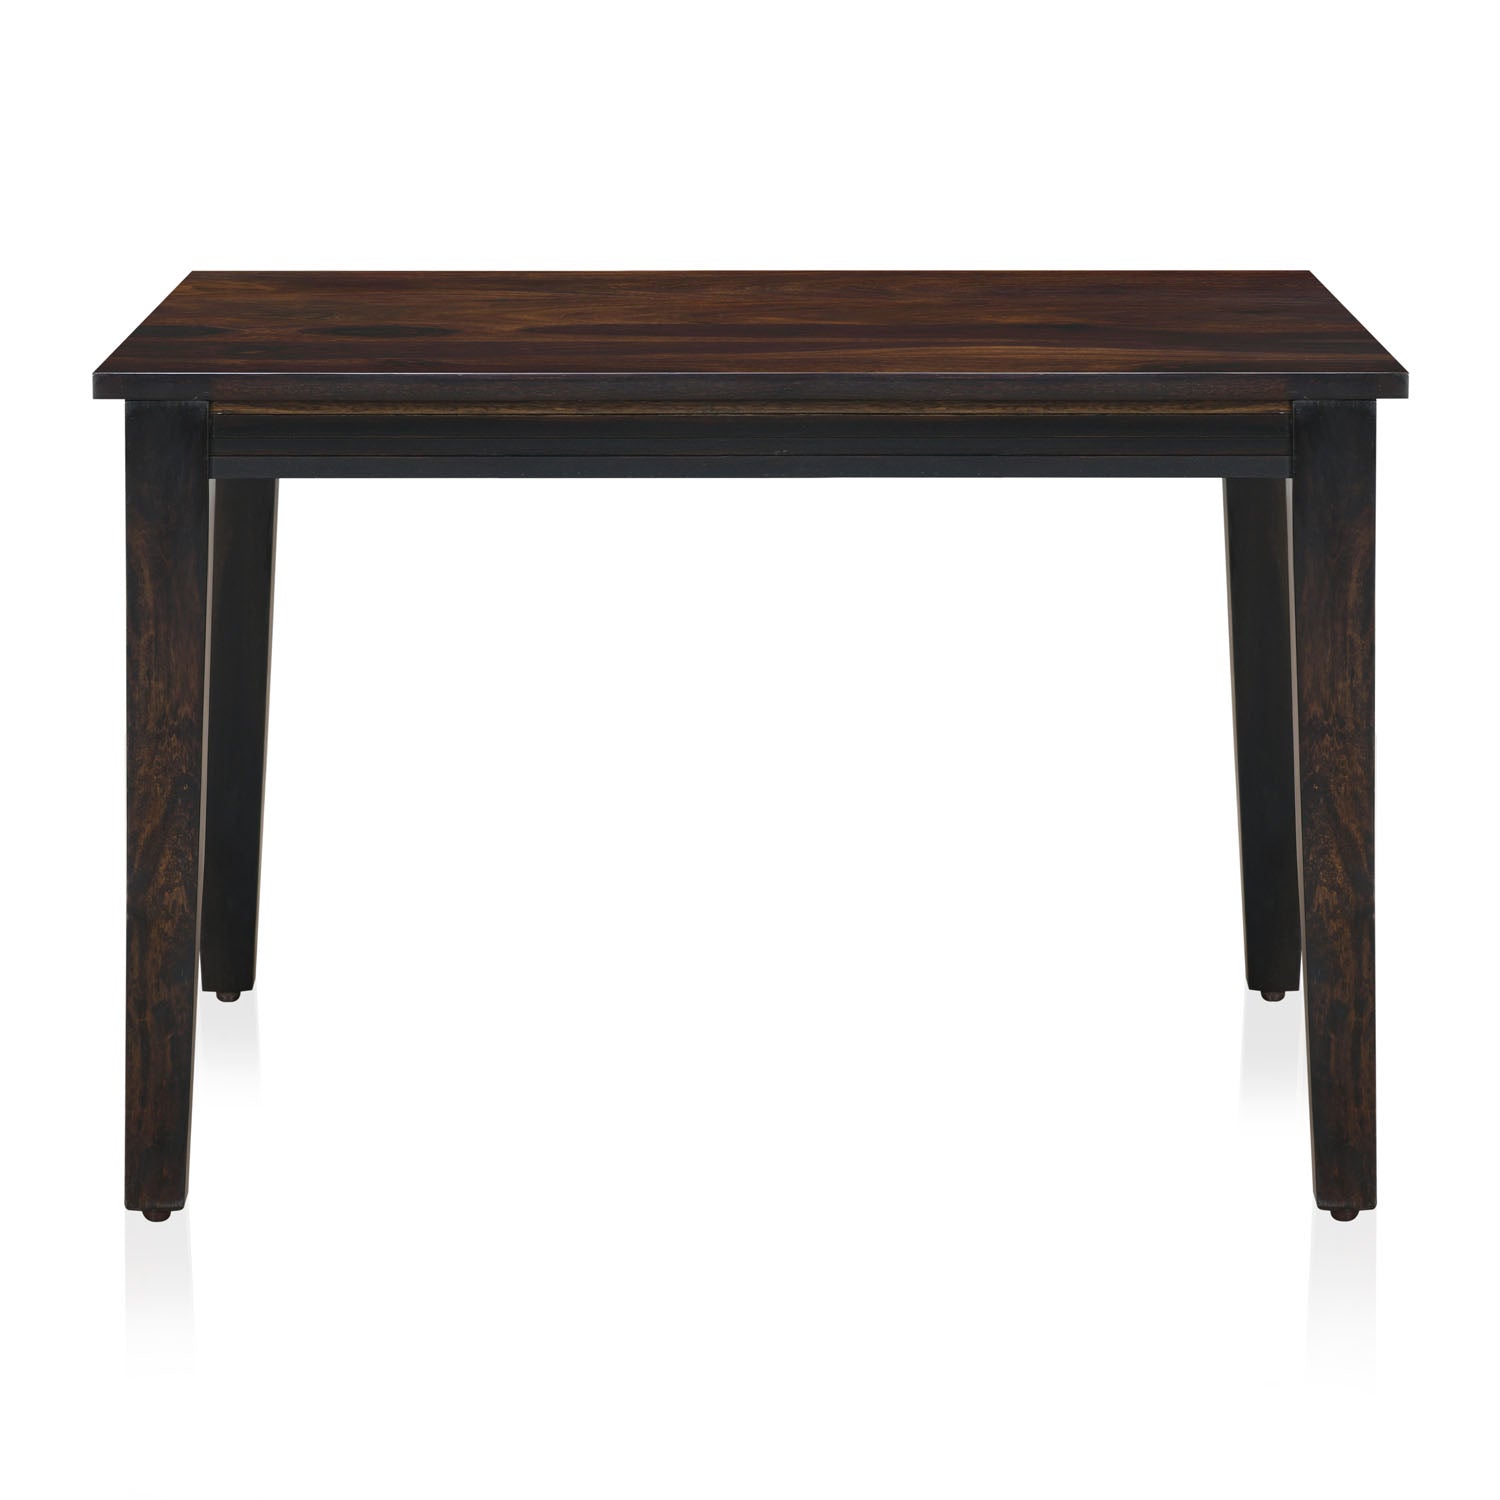 Virtue Solid Wood Dining Table (Natural Walnut)